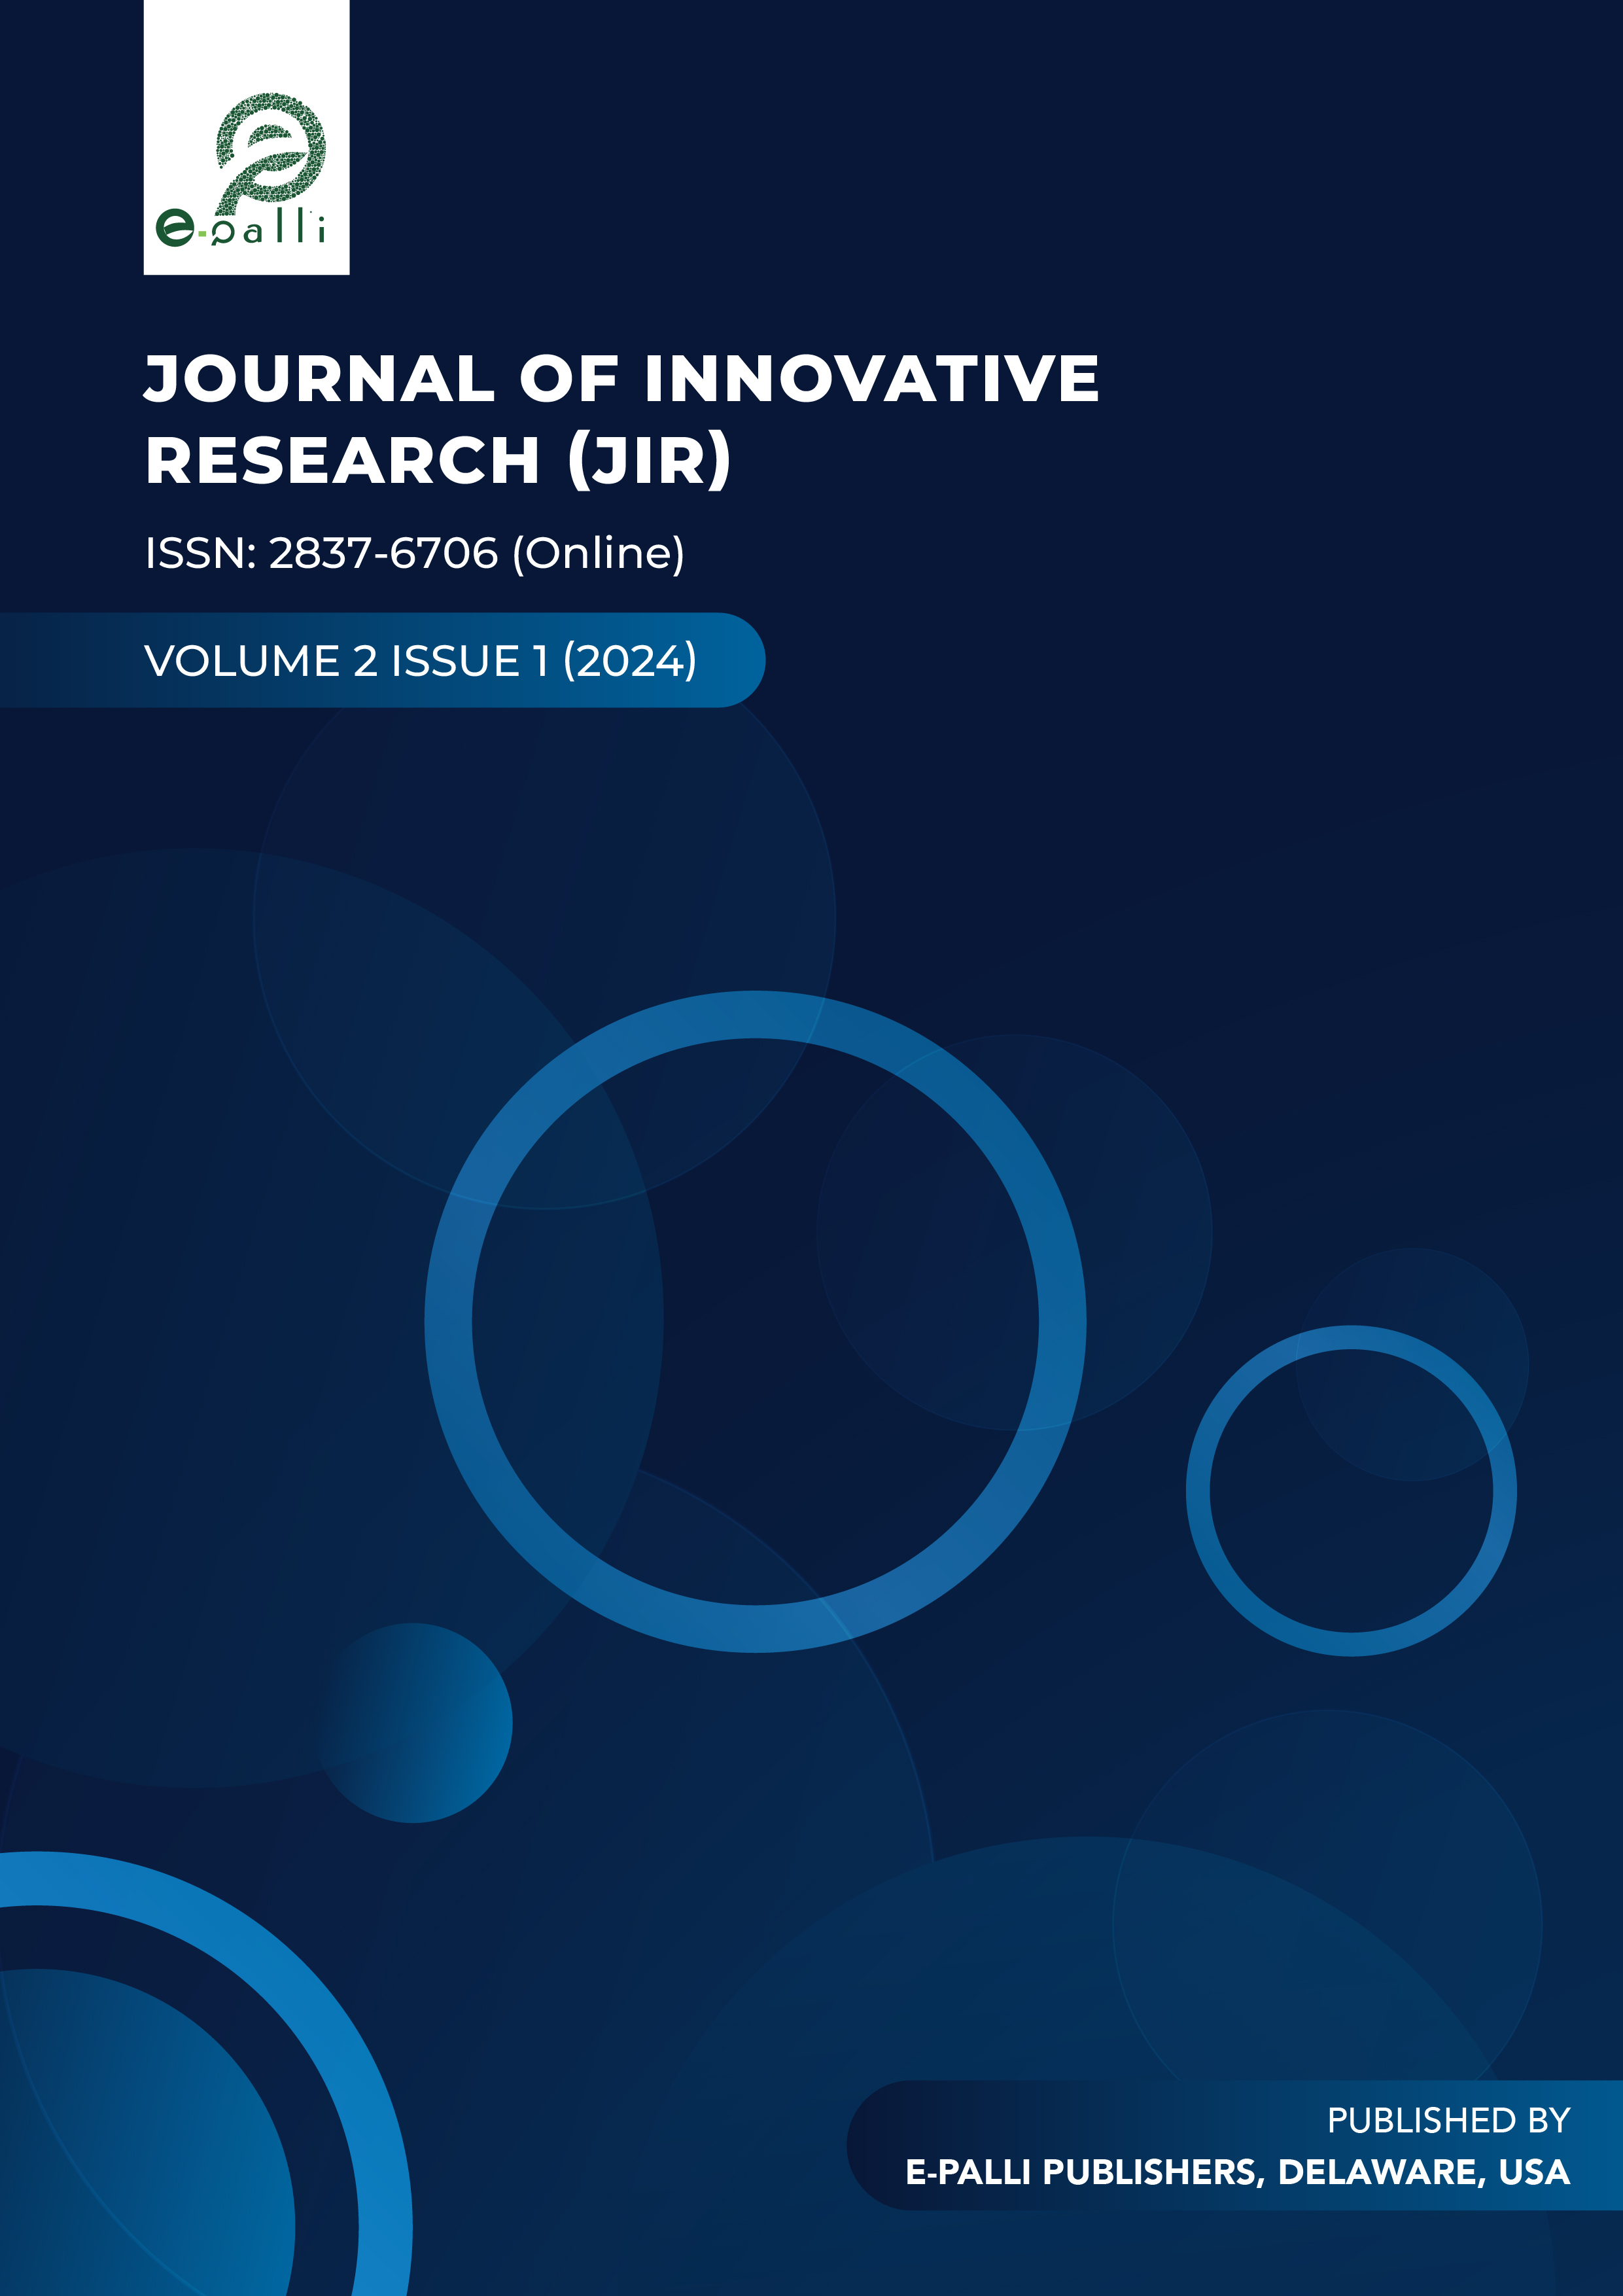                     View Vol. 2 No. 1 (2024): Journal of Innovative Research
                